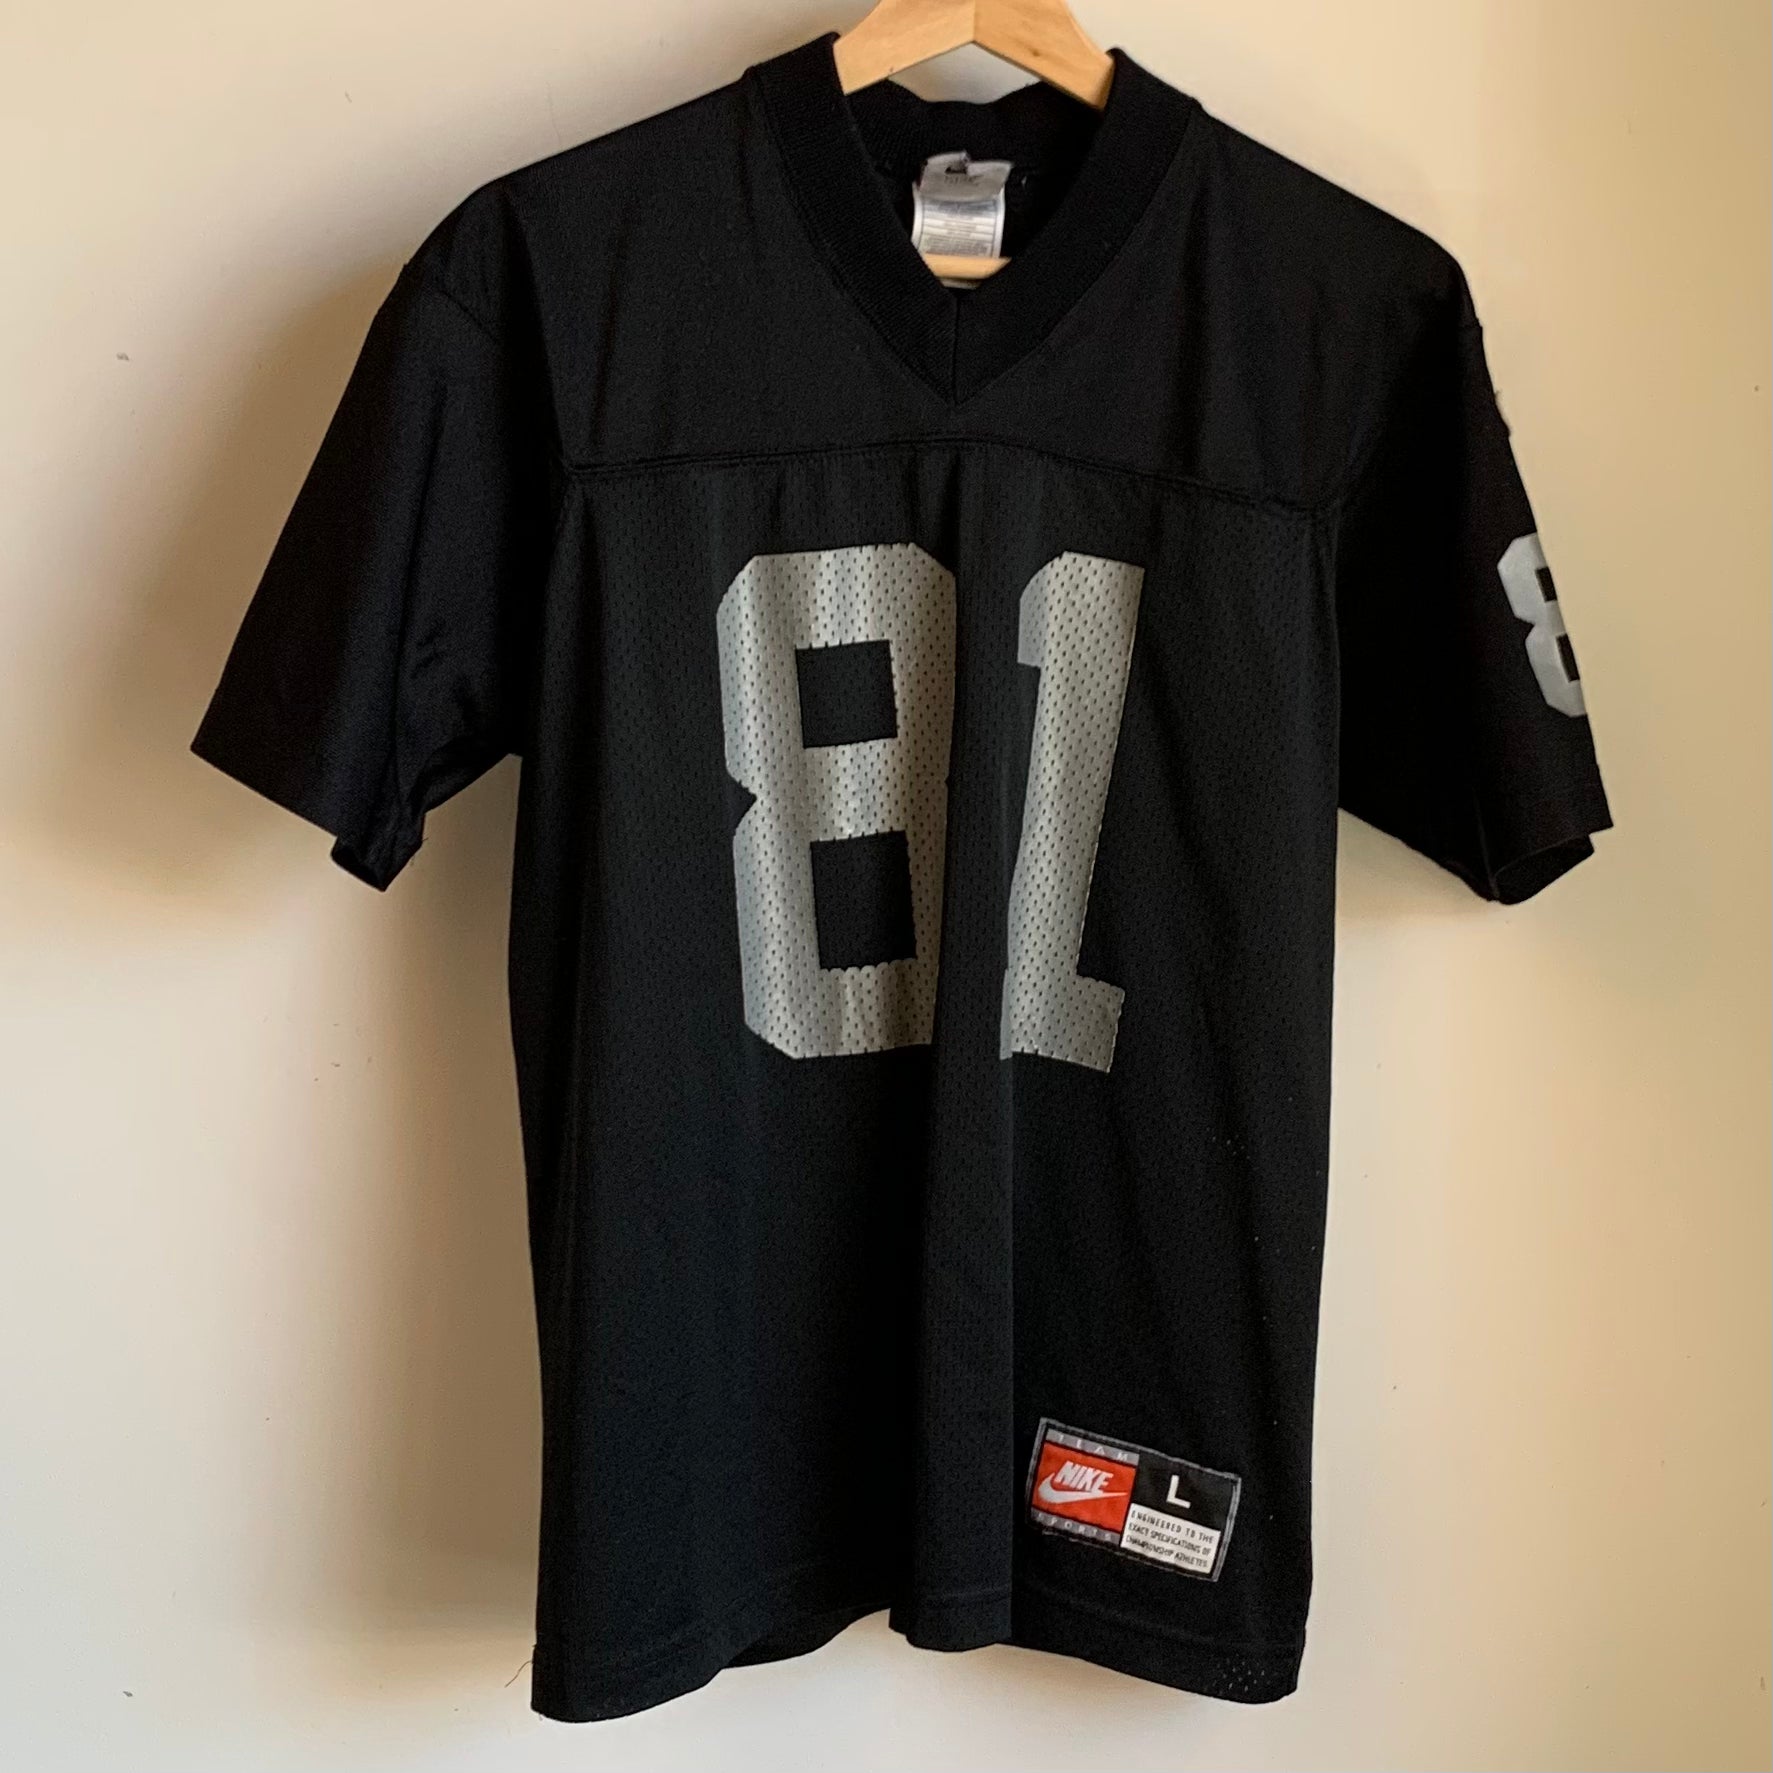 youth raiders jersey